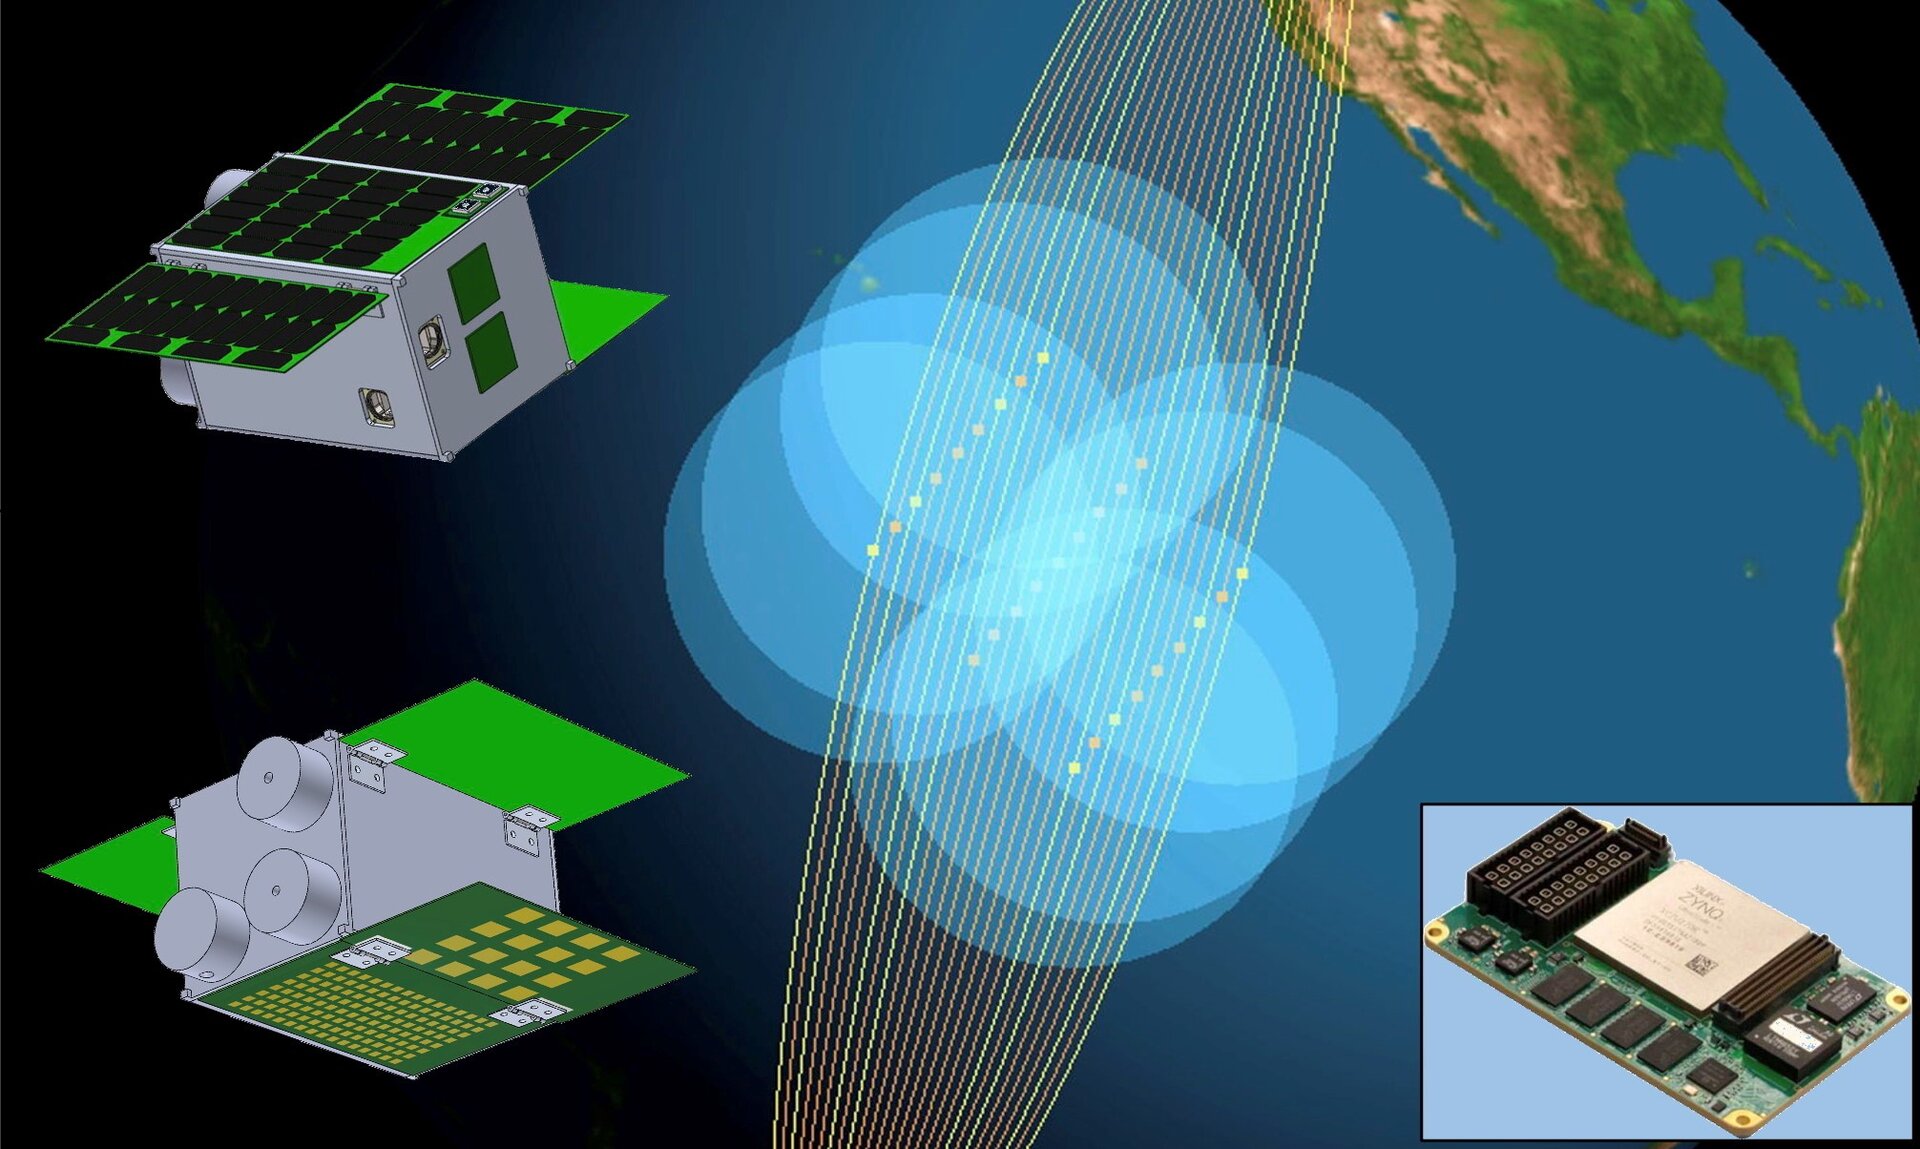 Collaborating CubeSats for monitoring Earth